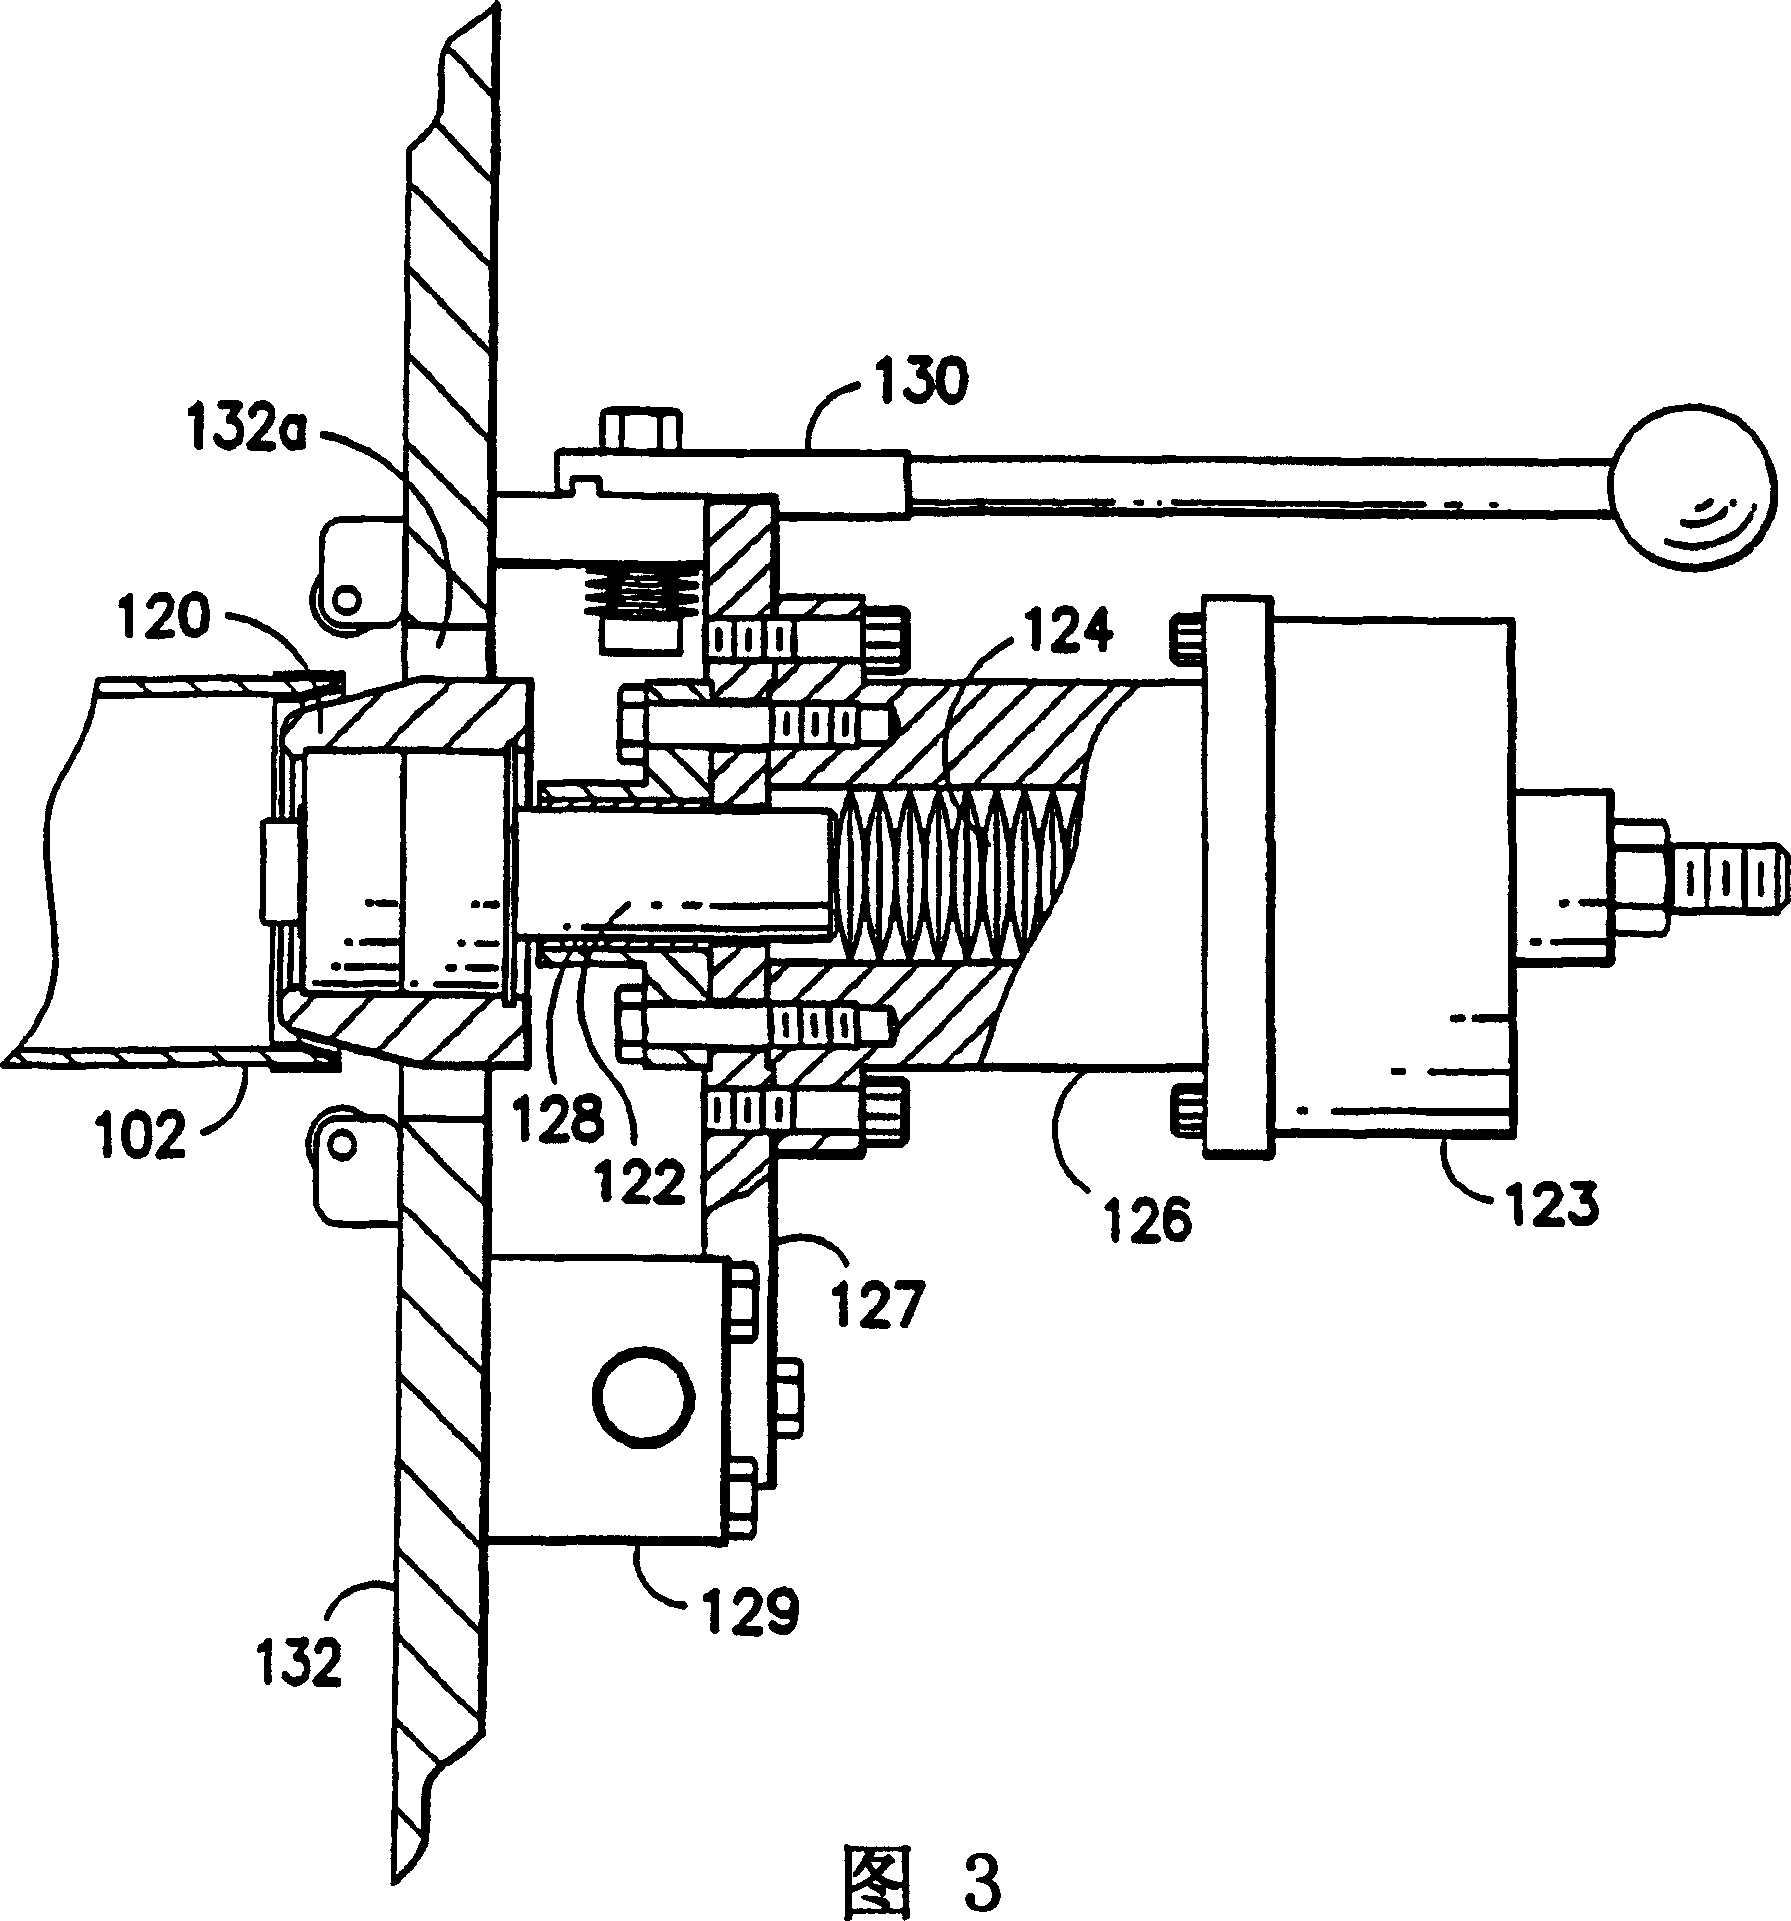 Fabric treatment apparatus comprising easily removable treatment tubes